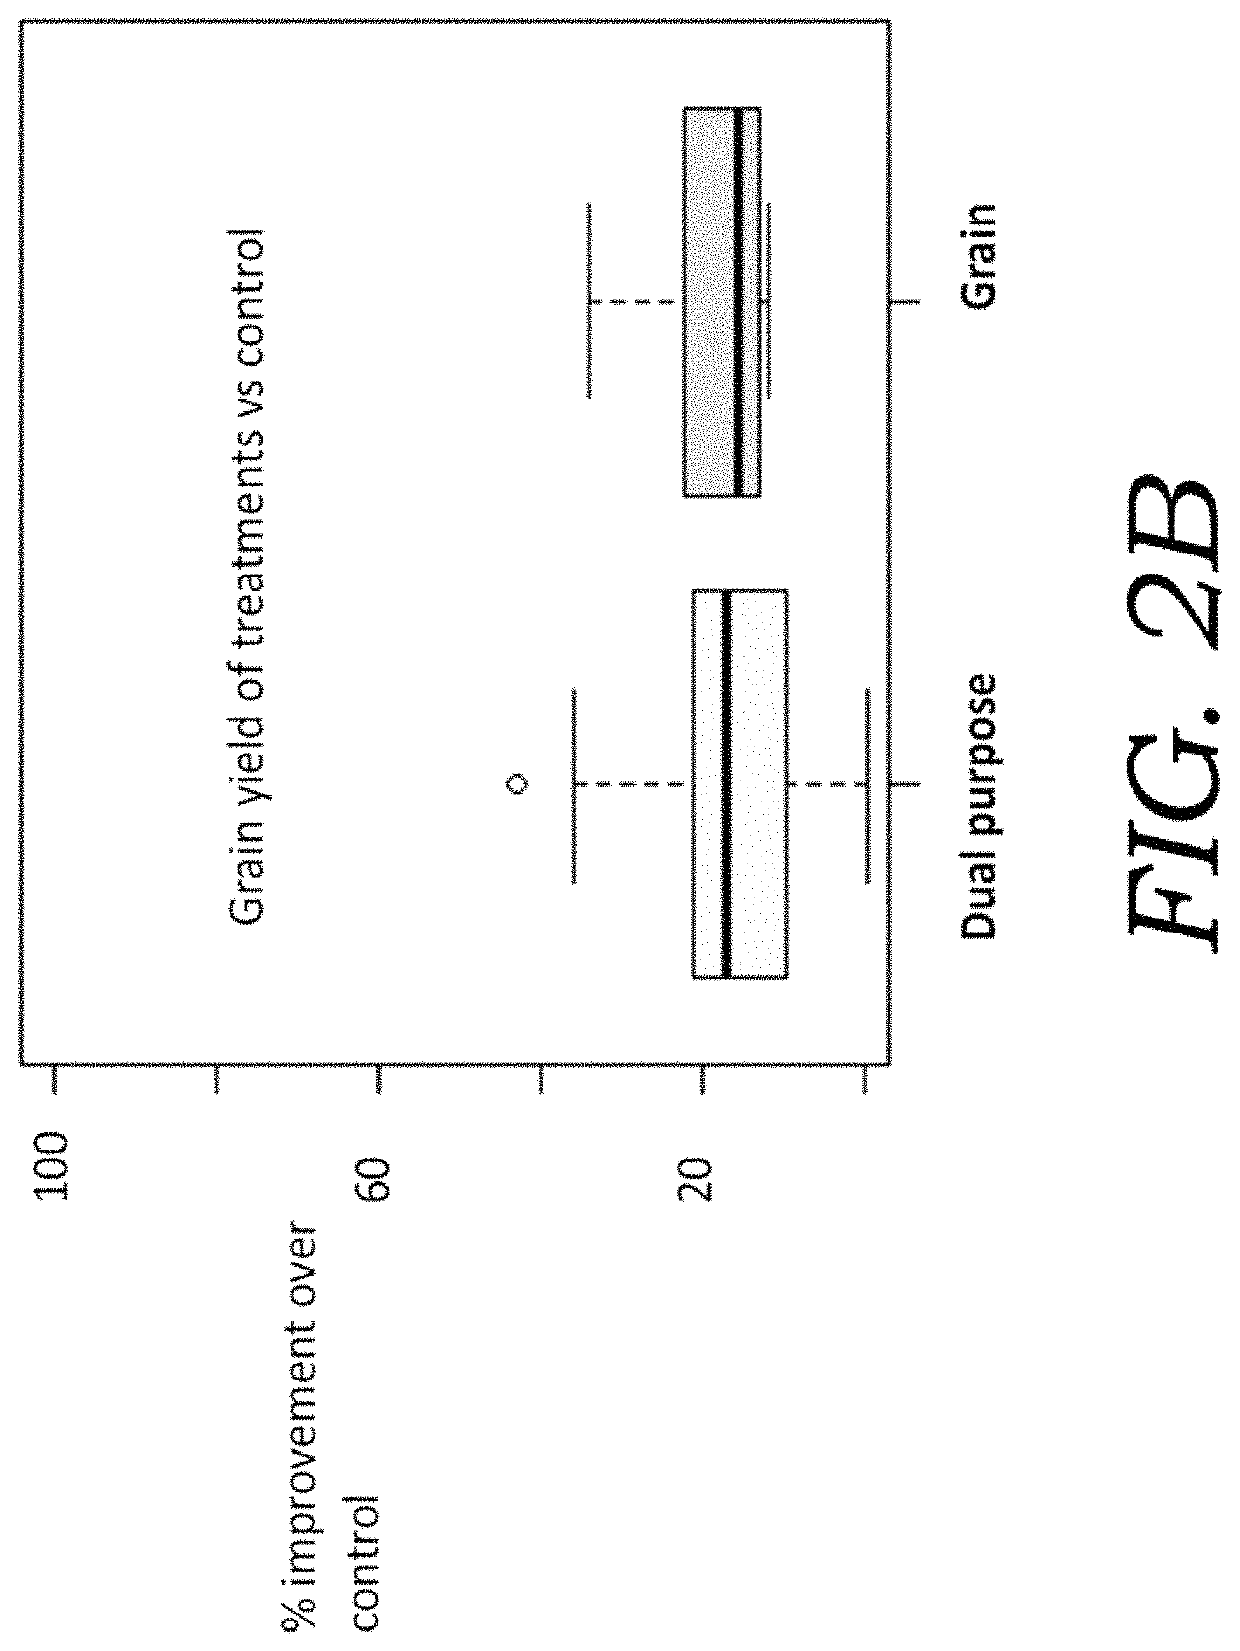 Endophytic microbial seed treatment formulations and methods related thereto for improved plant performance